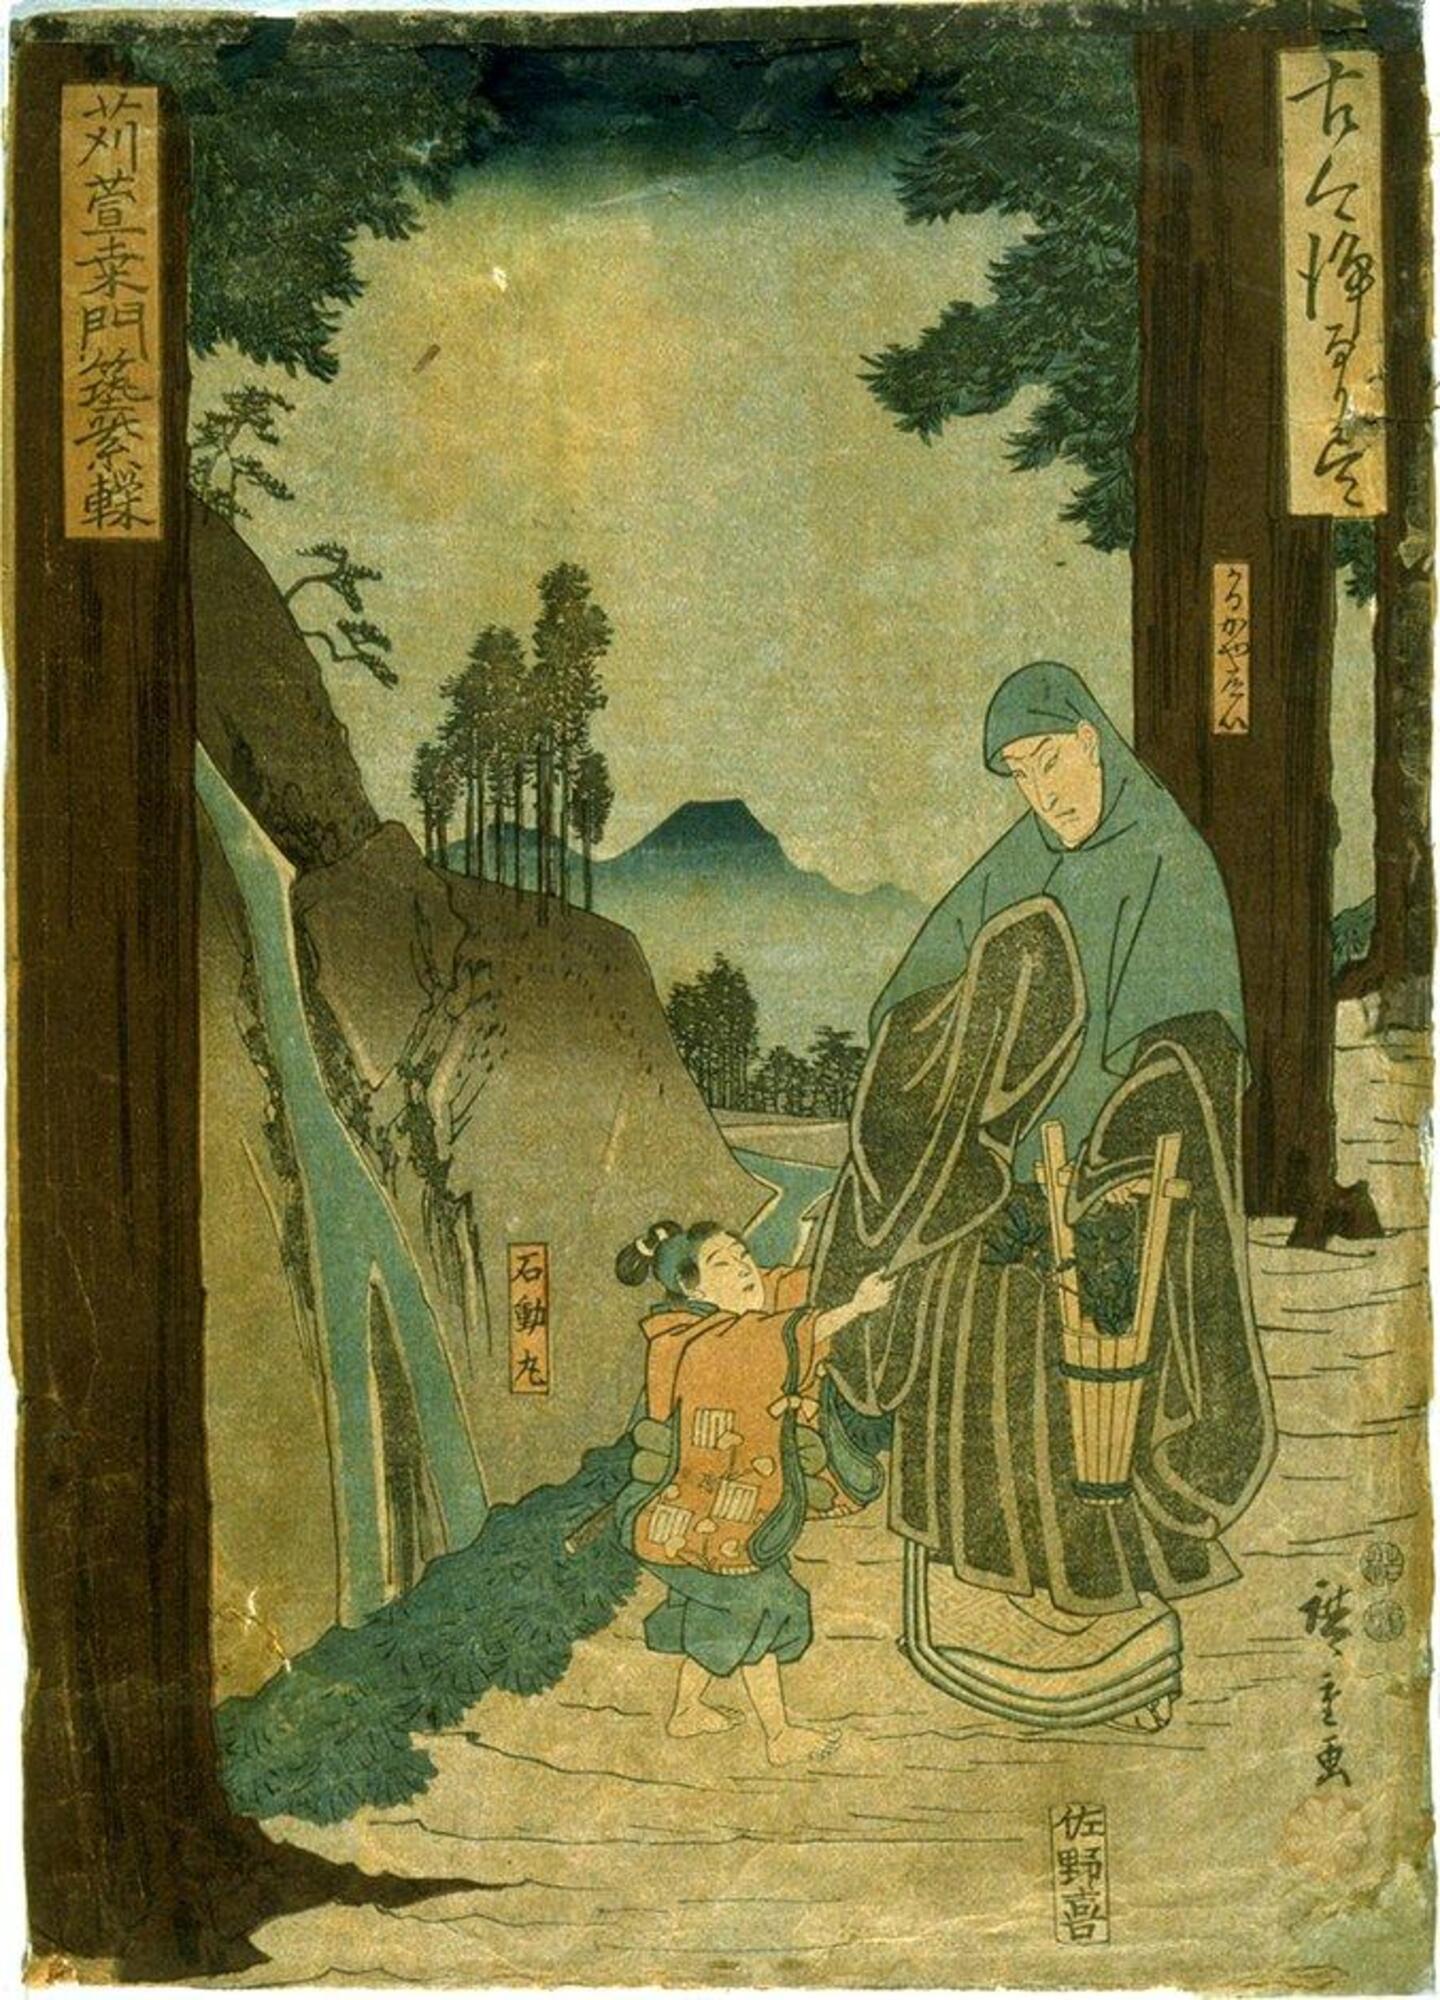 This print illustrates a scene in a jôruri play based on history.  Ishidômaru is the childhood name of a figure better known to history as Kûkai, the early 9th-century founder of the Shingon sect of Buddhism in Japan. In this scene, the child Ishidômaru has come to the remote mountain of Mt. Kôya in search of his father, a warrior who had taken the tonsure. When the two finally met, the father refused to recognize his son. The rejection of family ties was one of the basic tenets of monastic life in Buddhism.